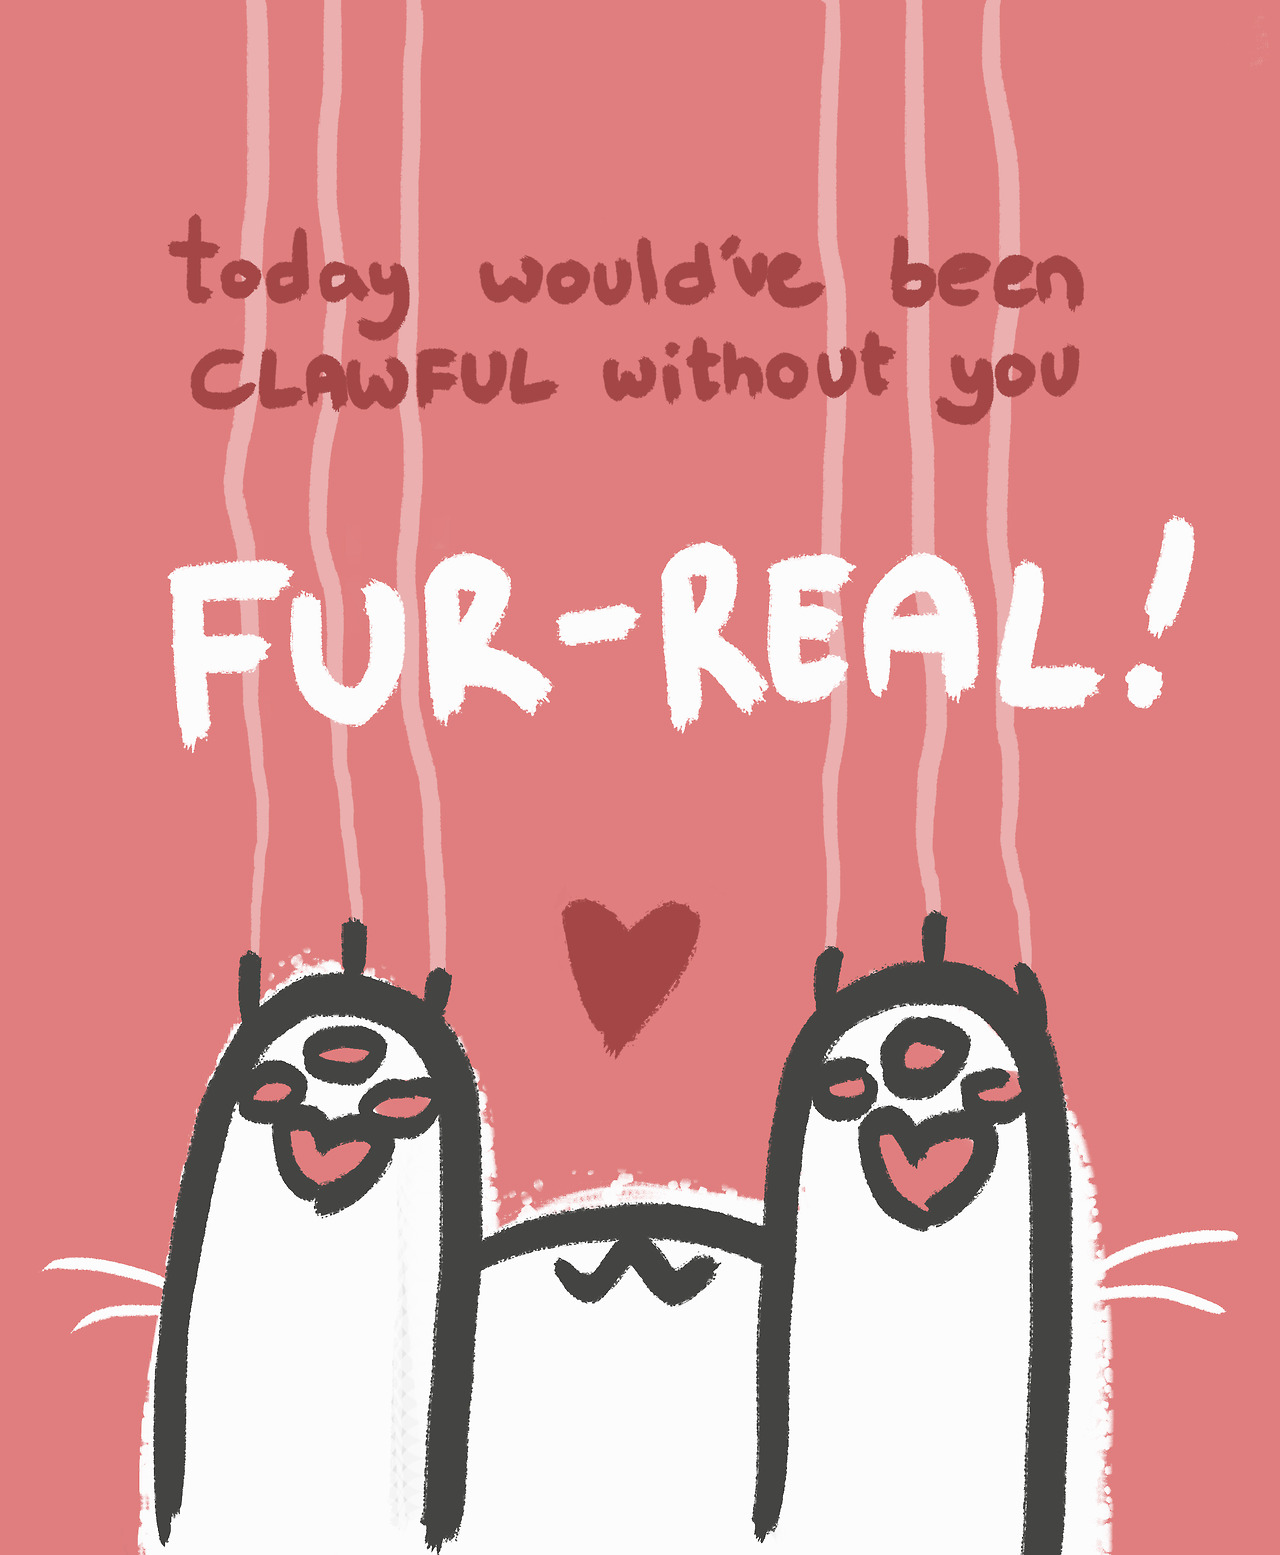 Today Would Be Clawful Without You. Fur-Real // Valentine's Day Cat Pun Printables